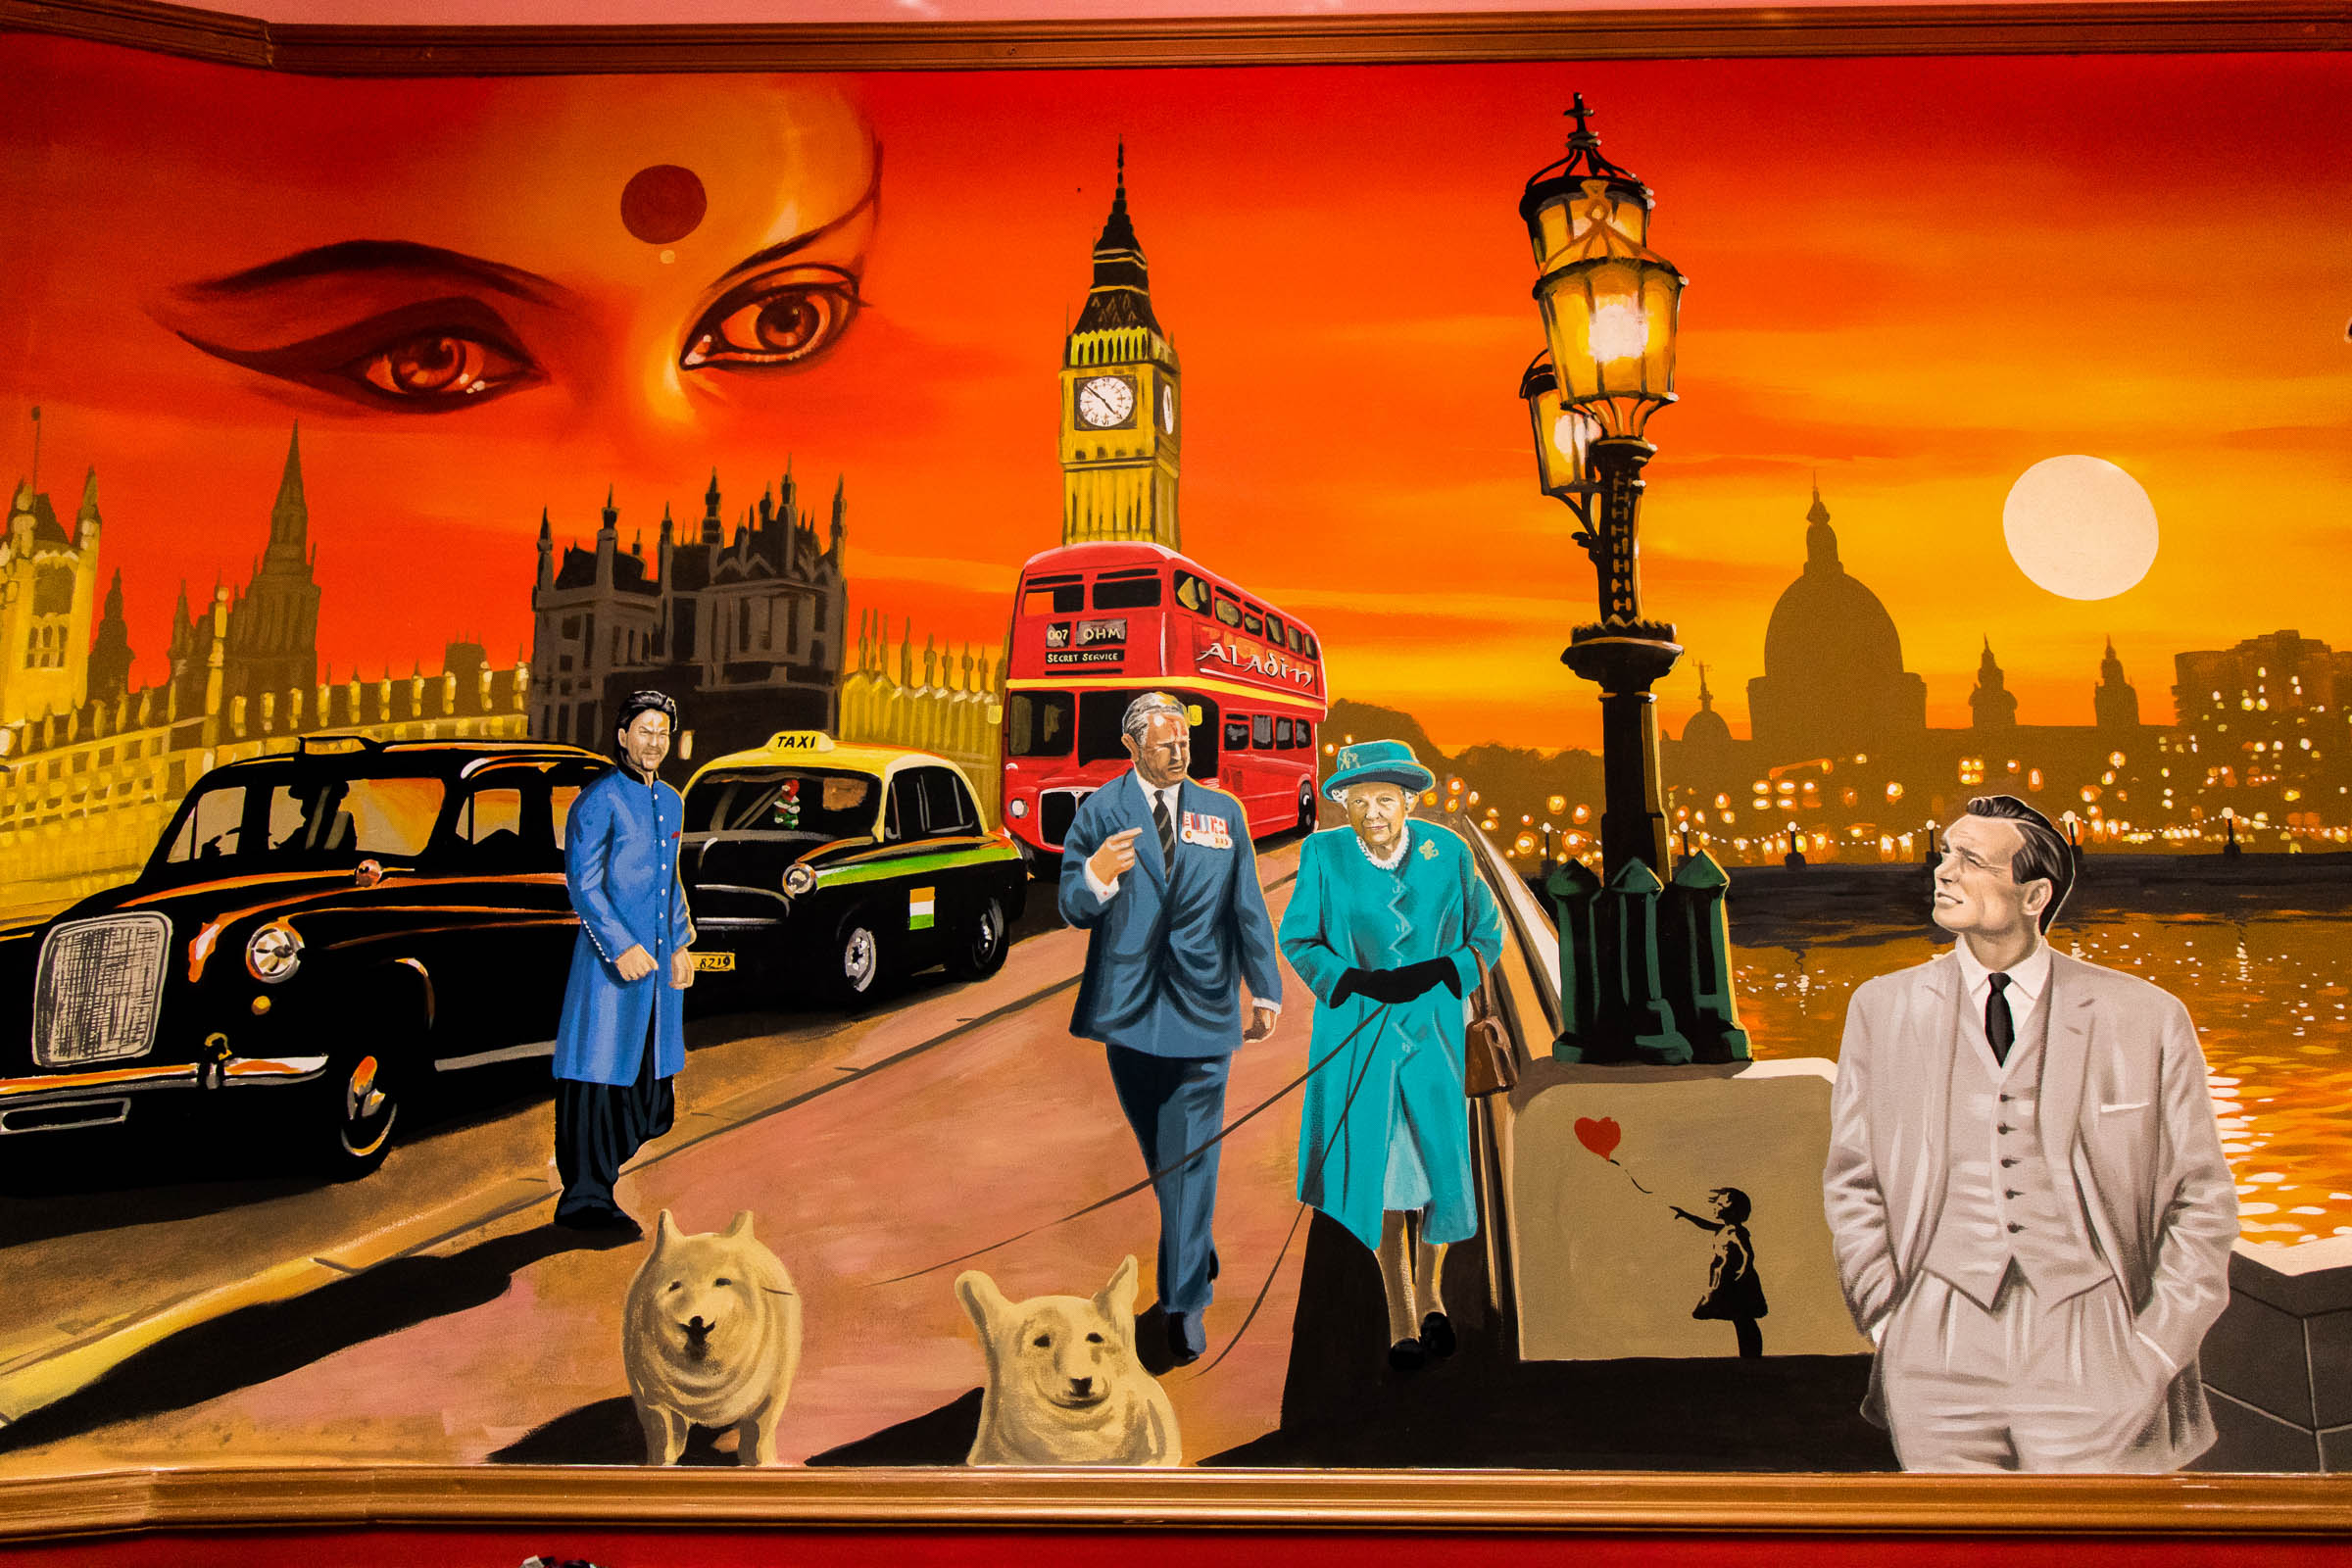 Mural in Aladin restaurant with Shah Rukh Khan, some Indian Goddess eyes, London and Delhi taxis, the Queen and Prince Charles, James Bond and a bit of Banksy